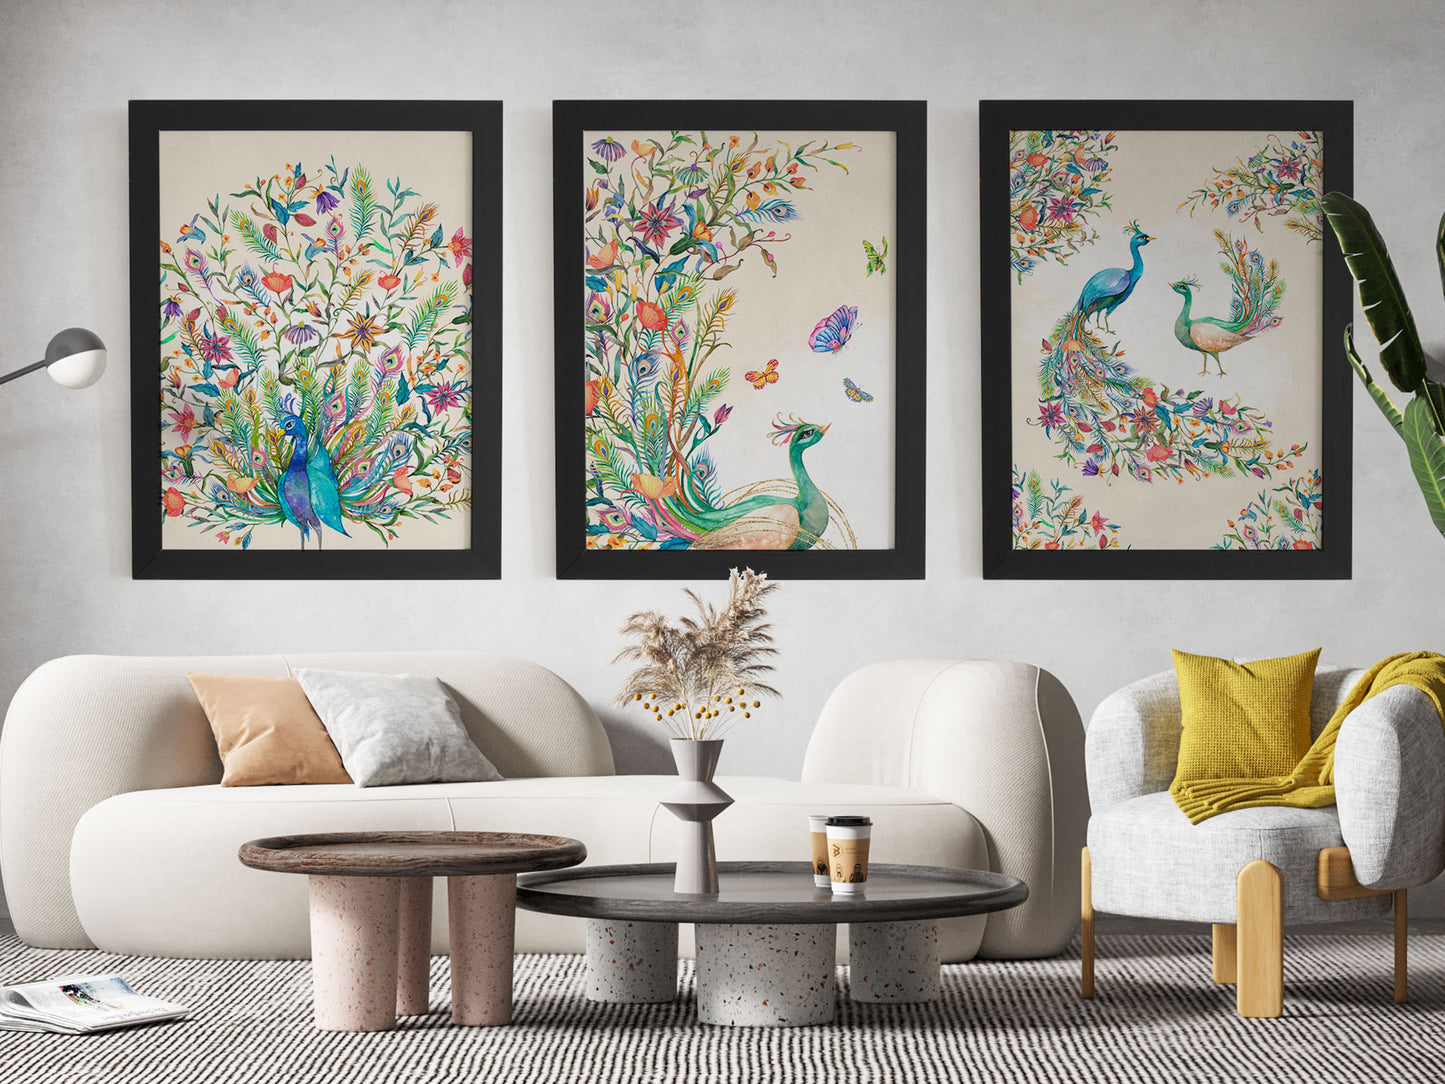 3 watercolor style Peacock posters